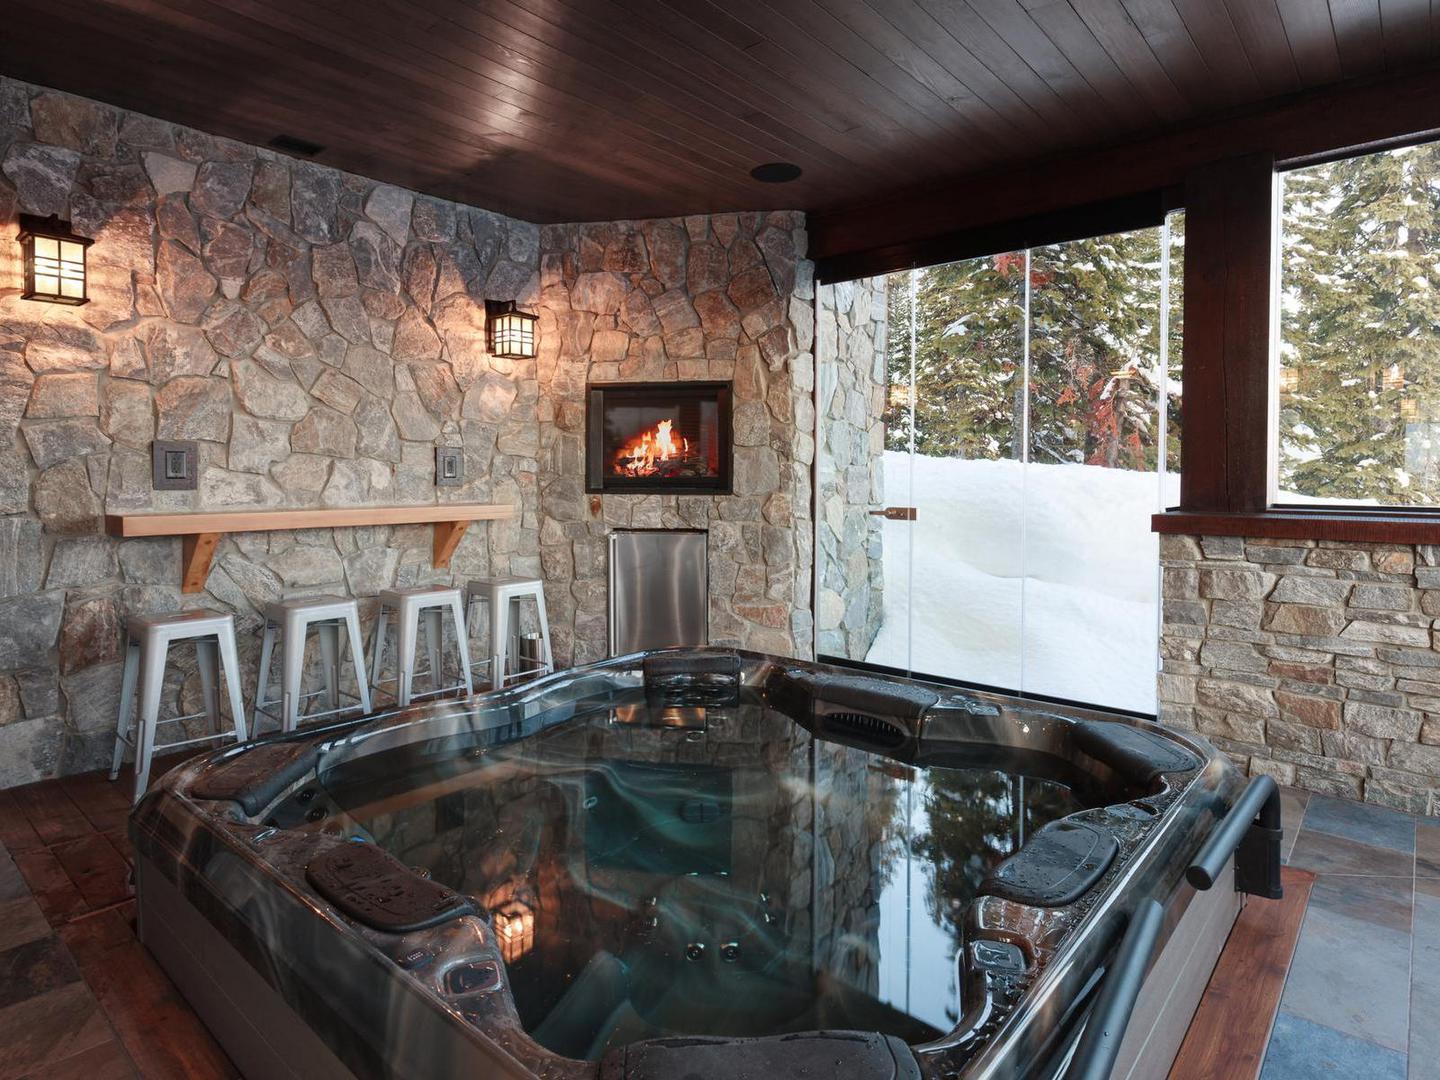 A private 8 person hot tub with a bar and mini fireplace with stone wall accents in an enclosed patio space at a luxury vacation rental by Luxury Mountain Vacation Rentals at Big White Ski Resort.